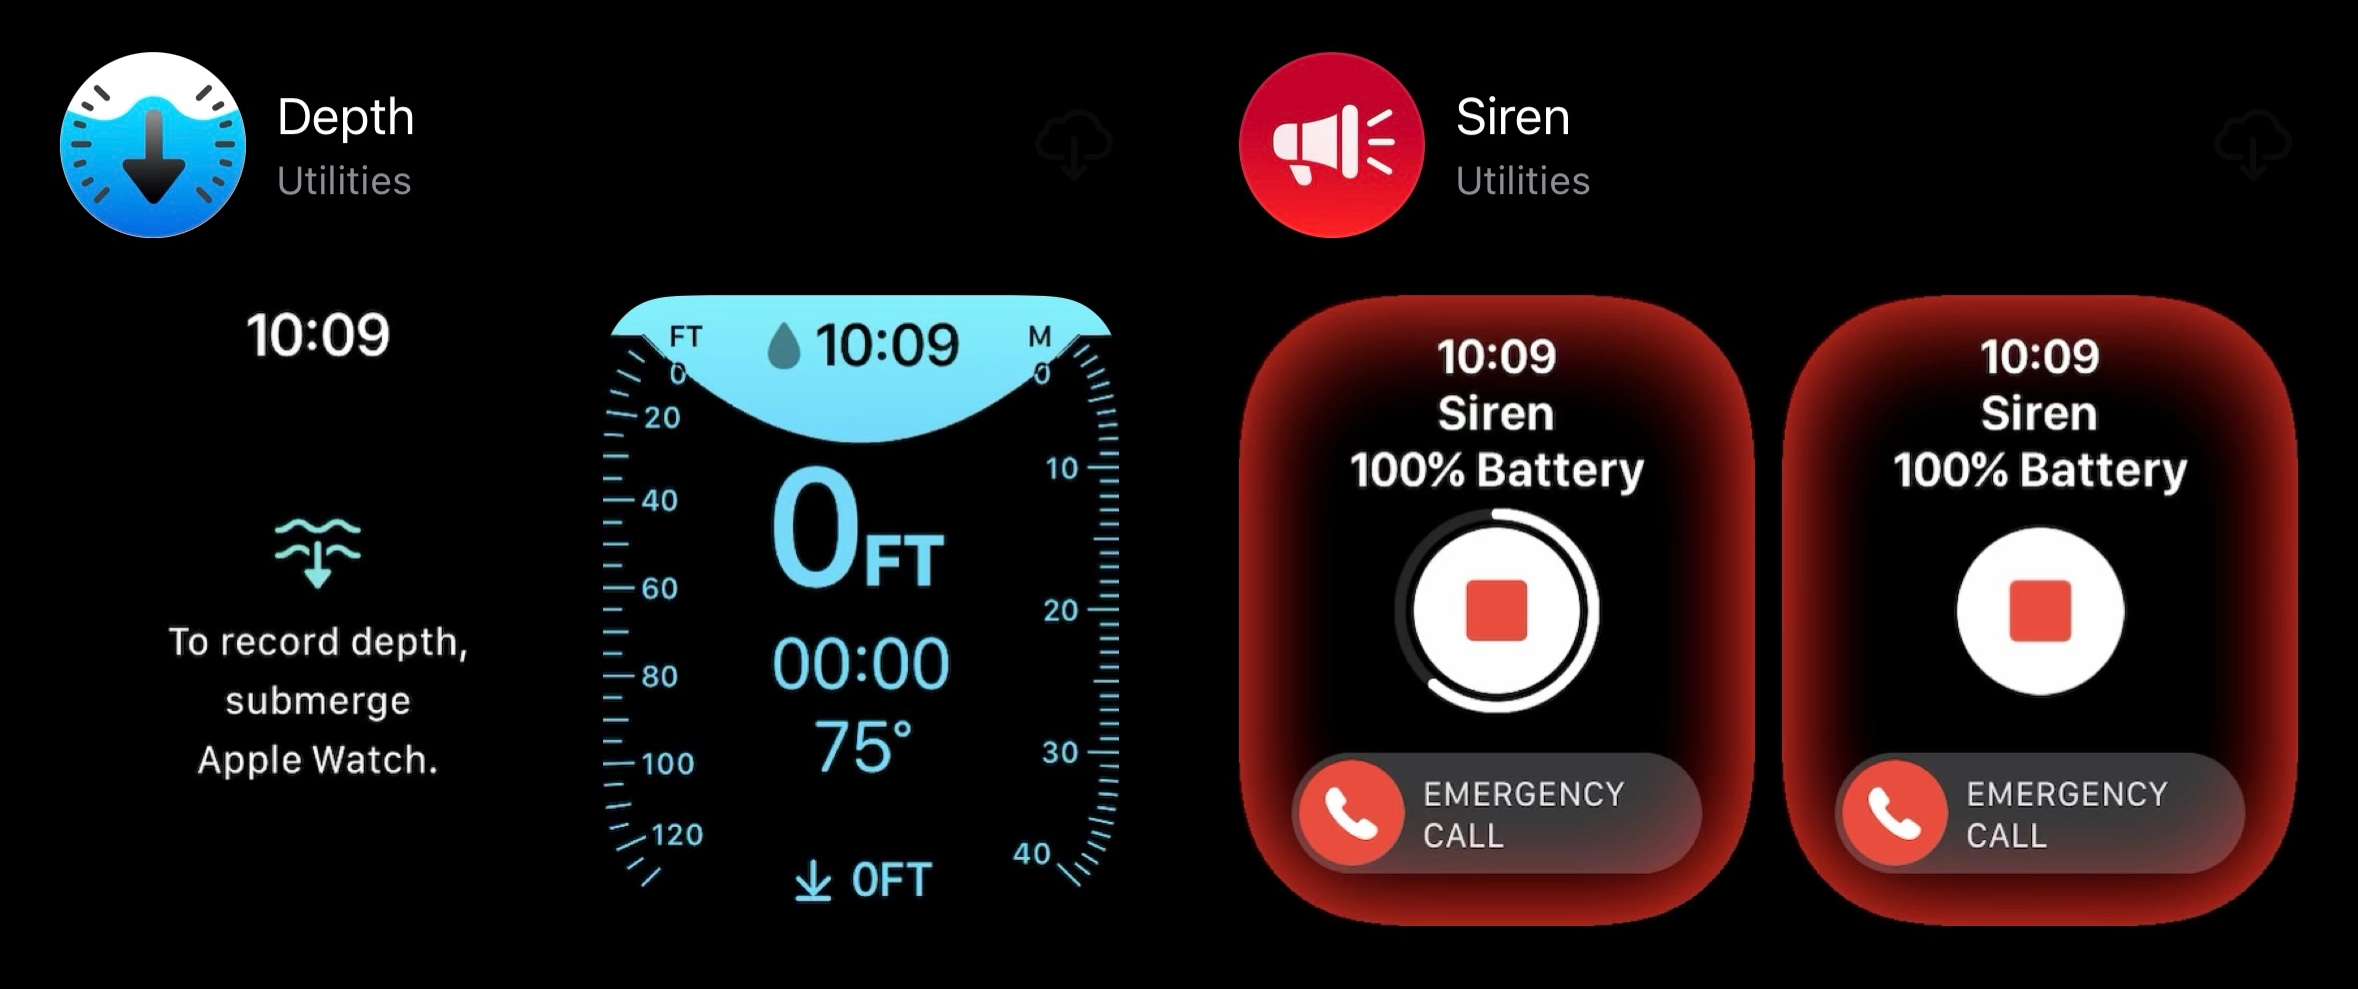 Apple Watch Ultra ‘Depth’ and ‘Siren’ Apps Appear on App Store Ahead of Device’s Launch This Friday